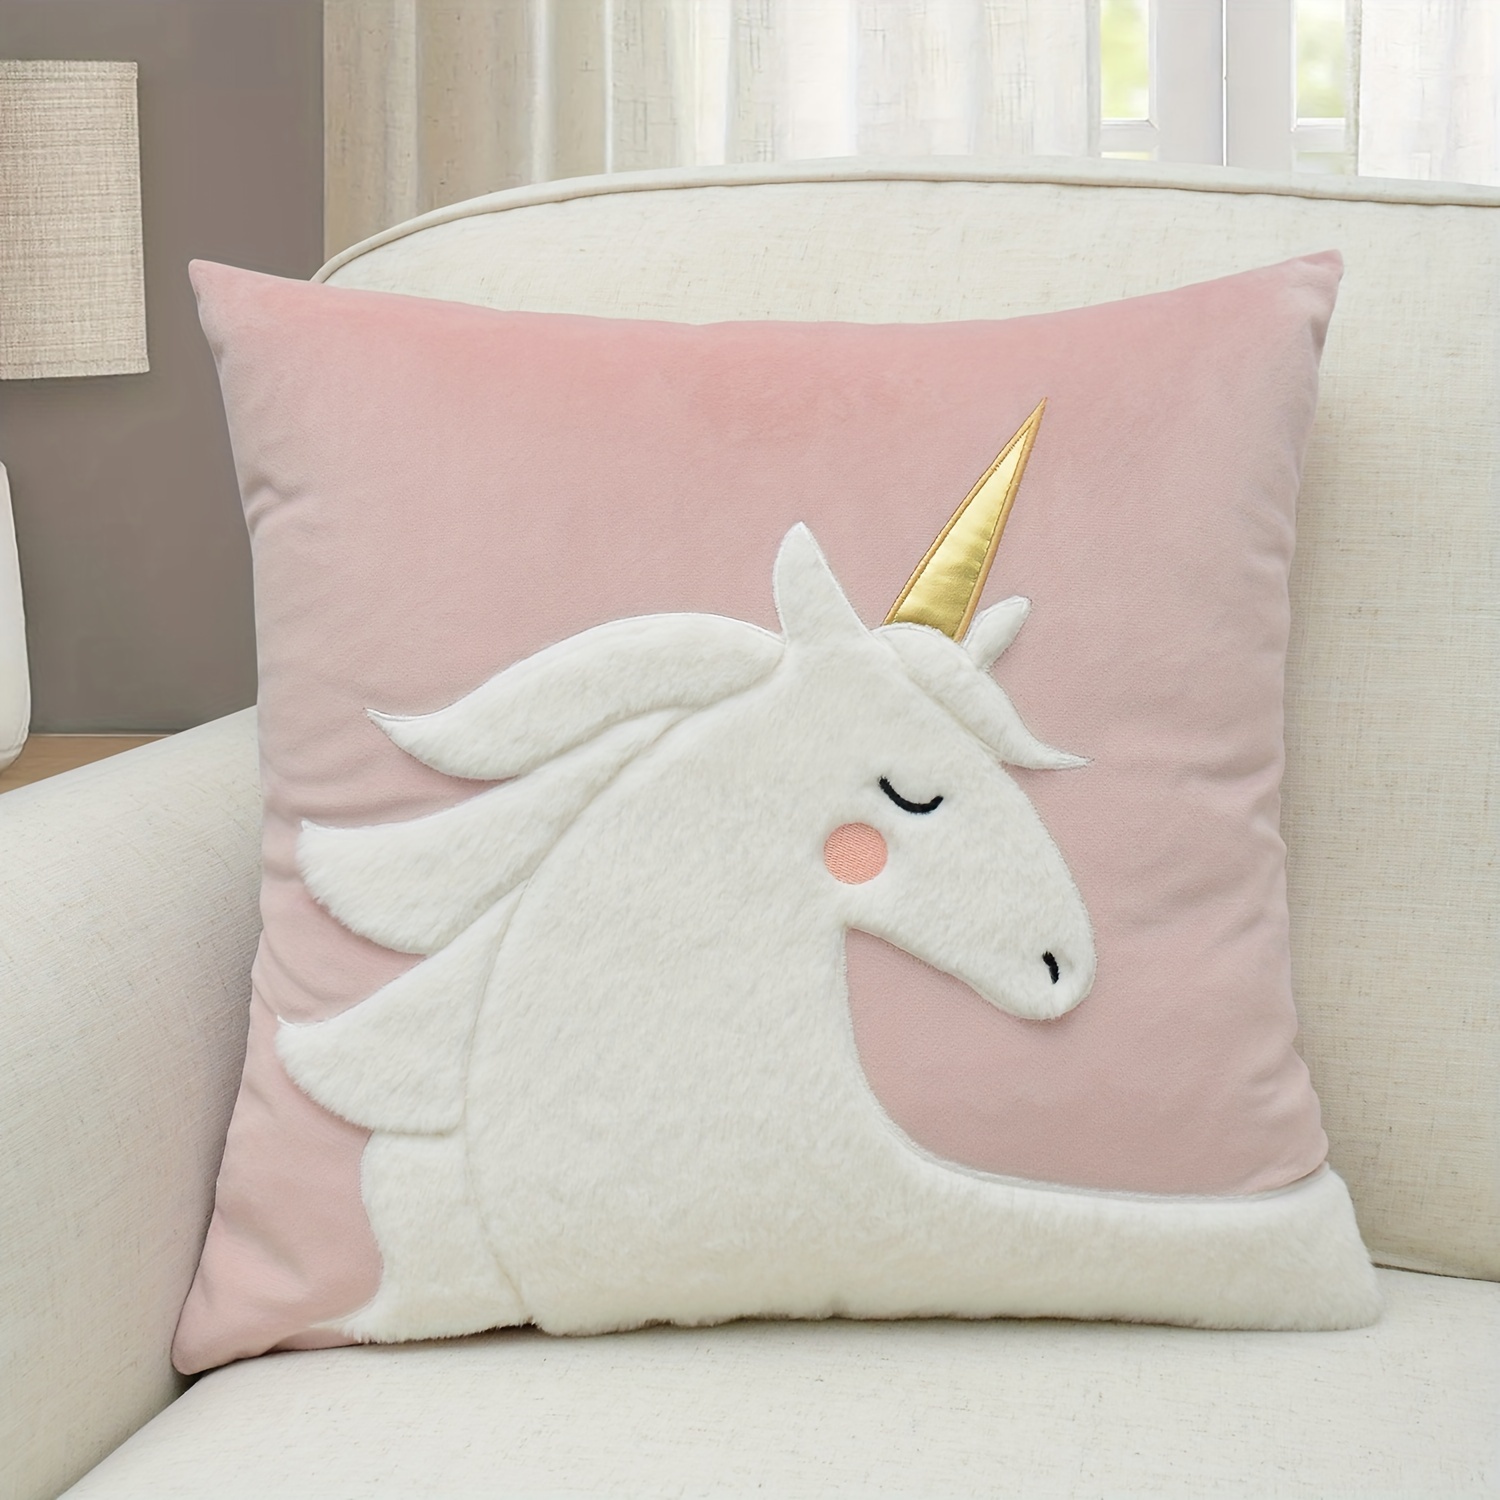 

1pc Contemporary Unicorn Throw Pillow Cover With Soft Embroidery, Zipper Closure, Machine Washable, Polyester - Ideal For Home Decor In All Seasons